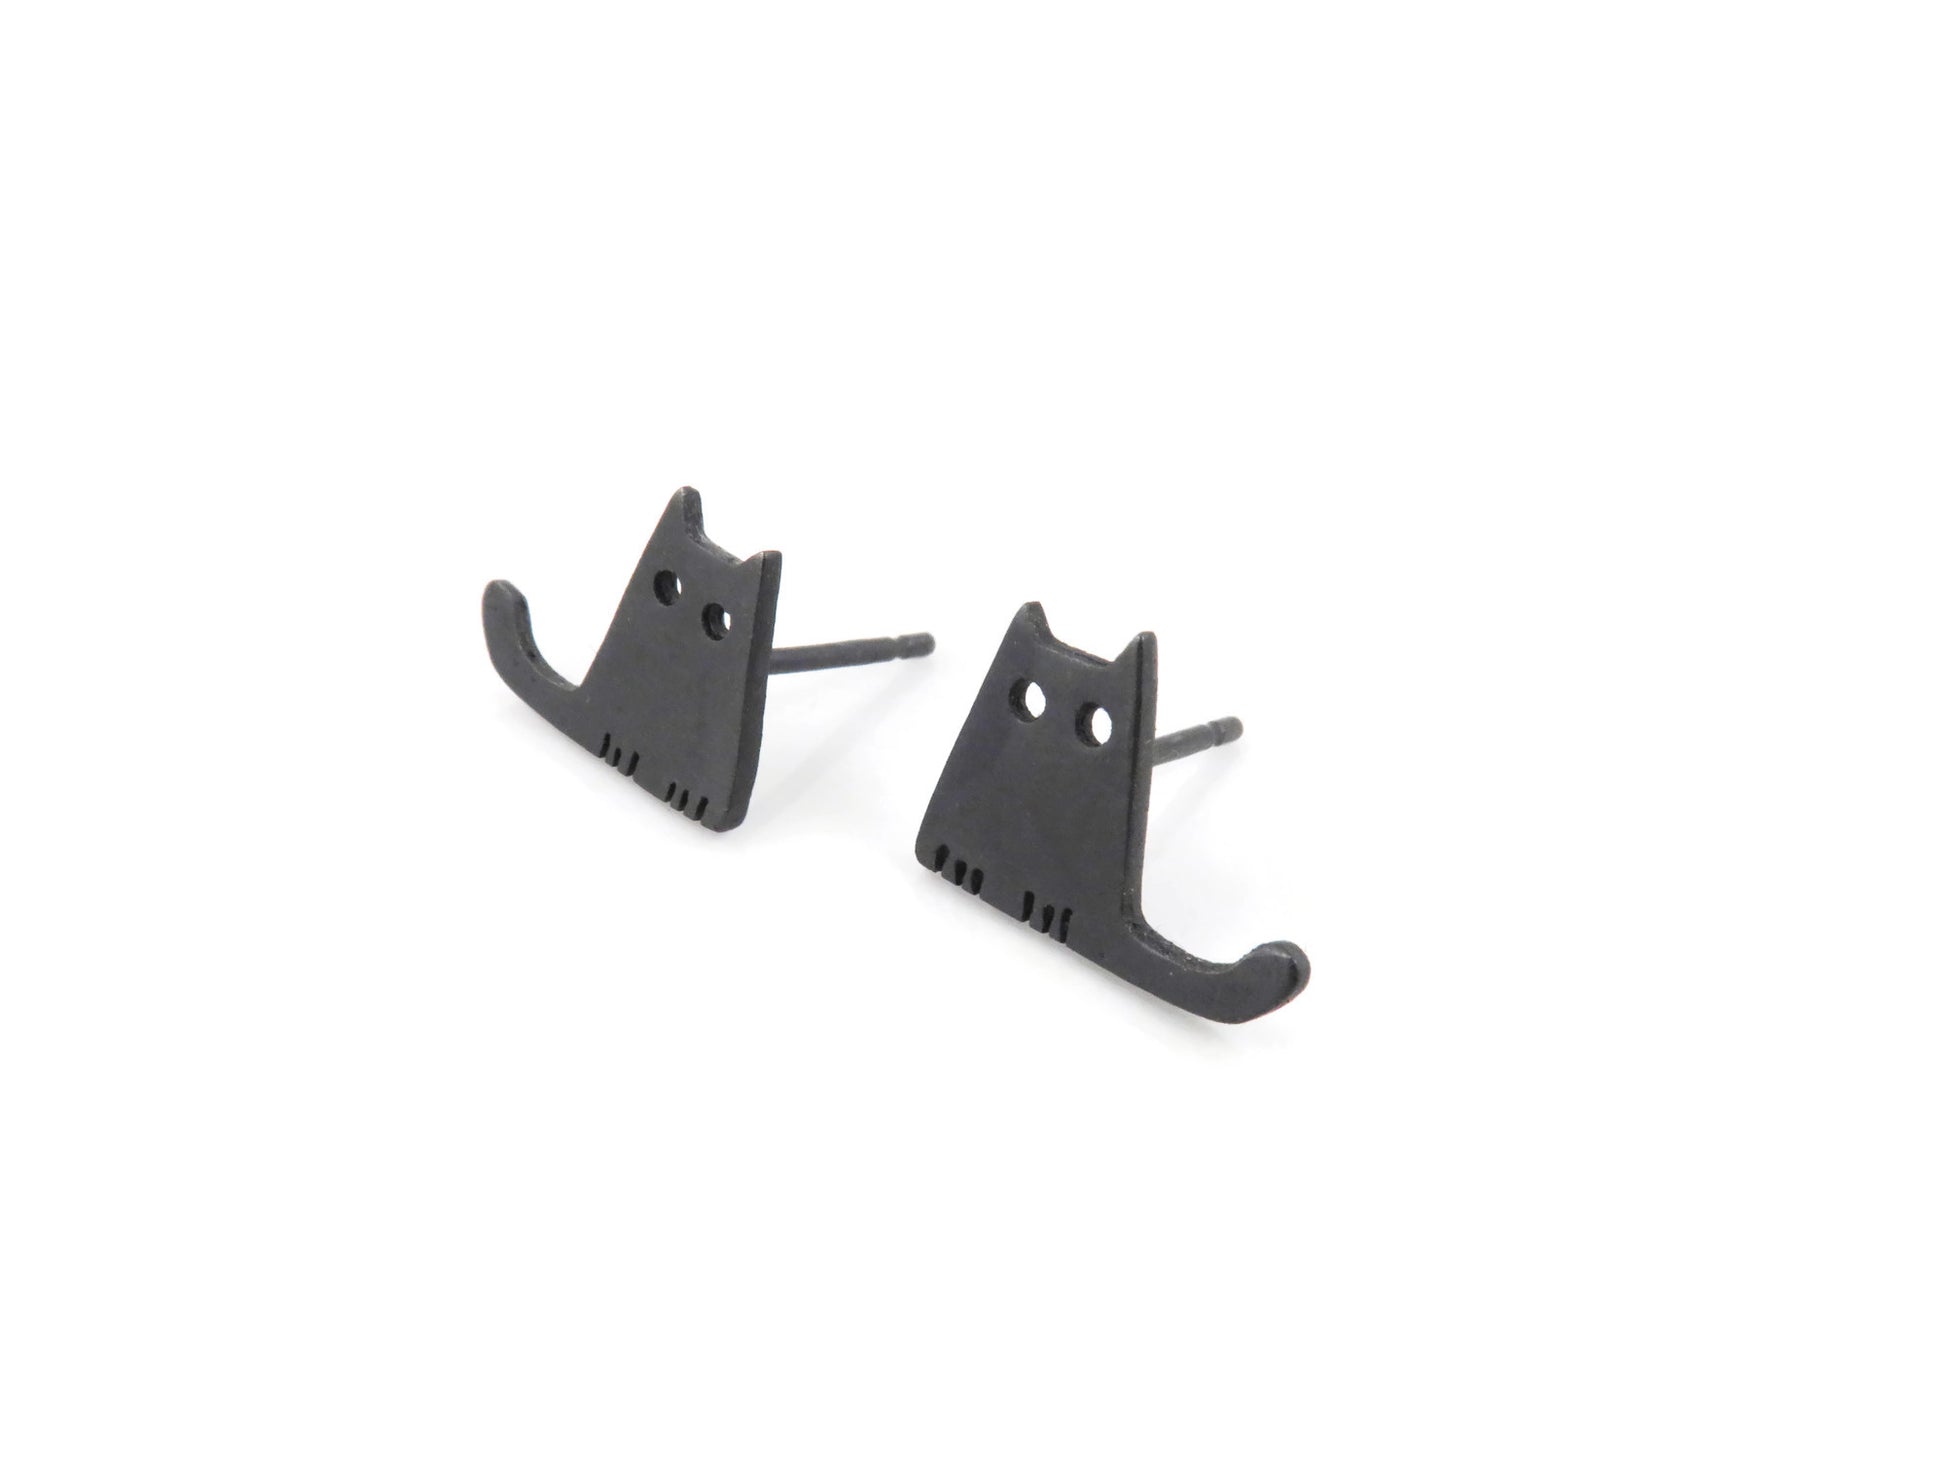 Tiny Cats Oxidized Silver Stud Earrings